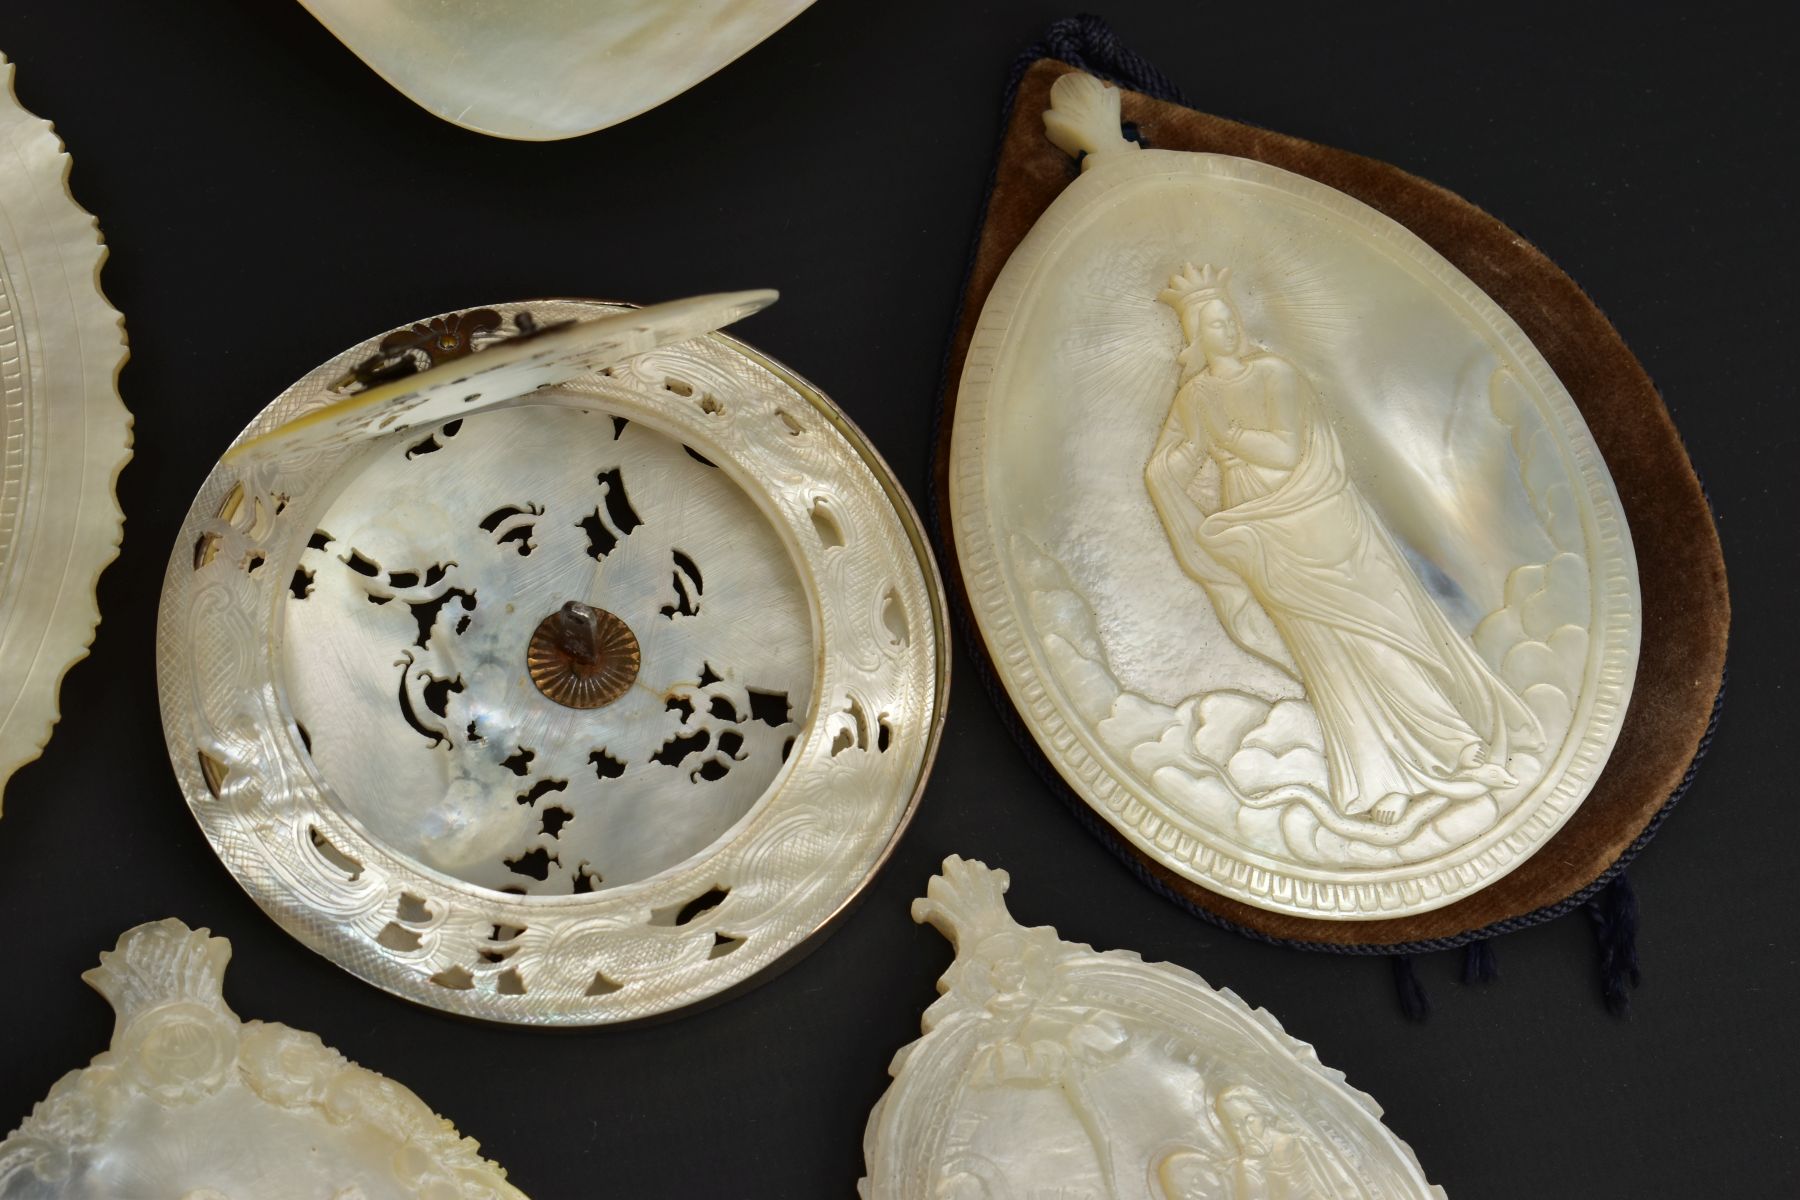 SEVEN MOTHER OF PEARL SHELL CARVINGS OF BIBLICAL SCENES, including the Nativity, the crucifixion and - Image 11 of 17